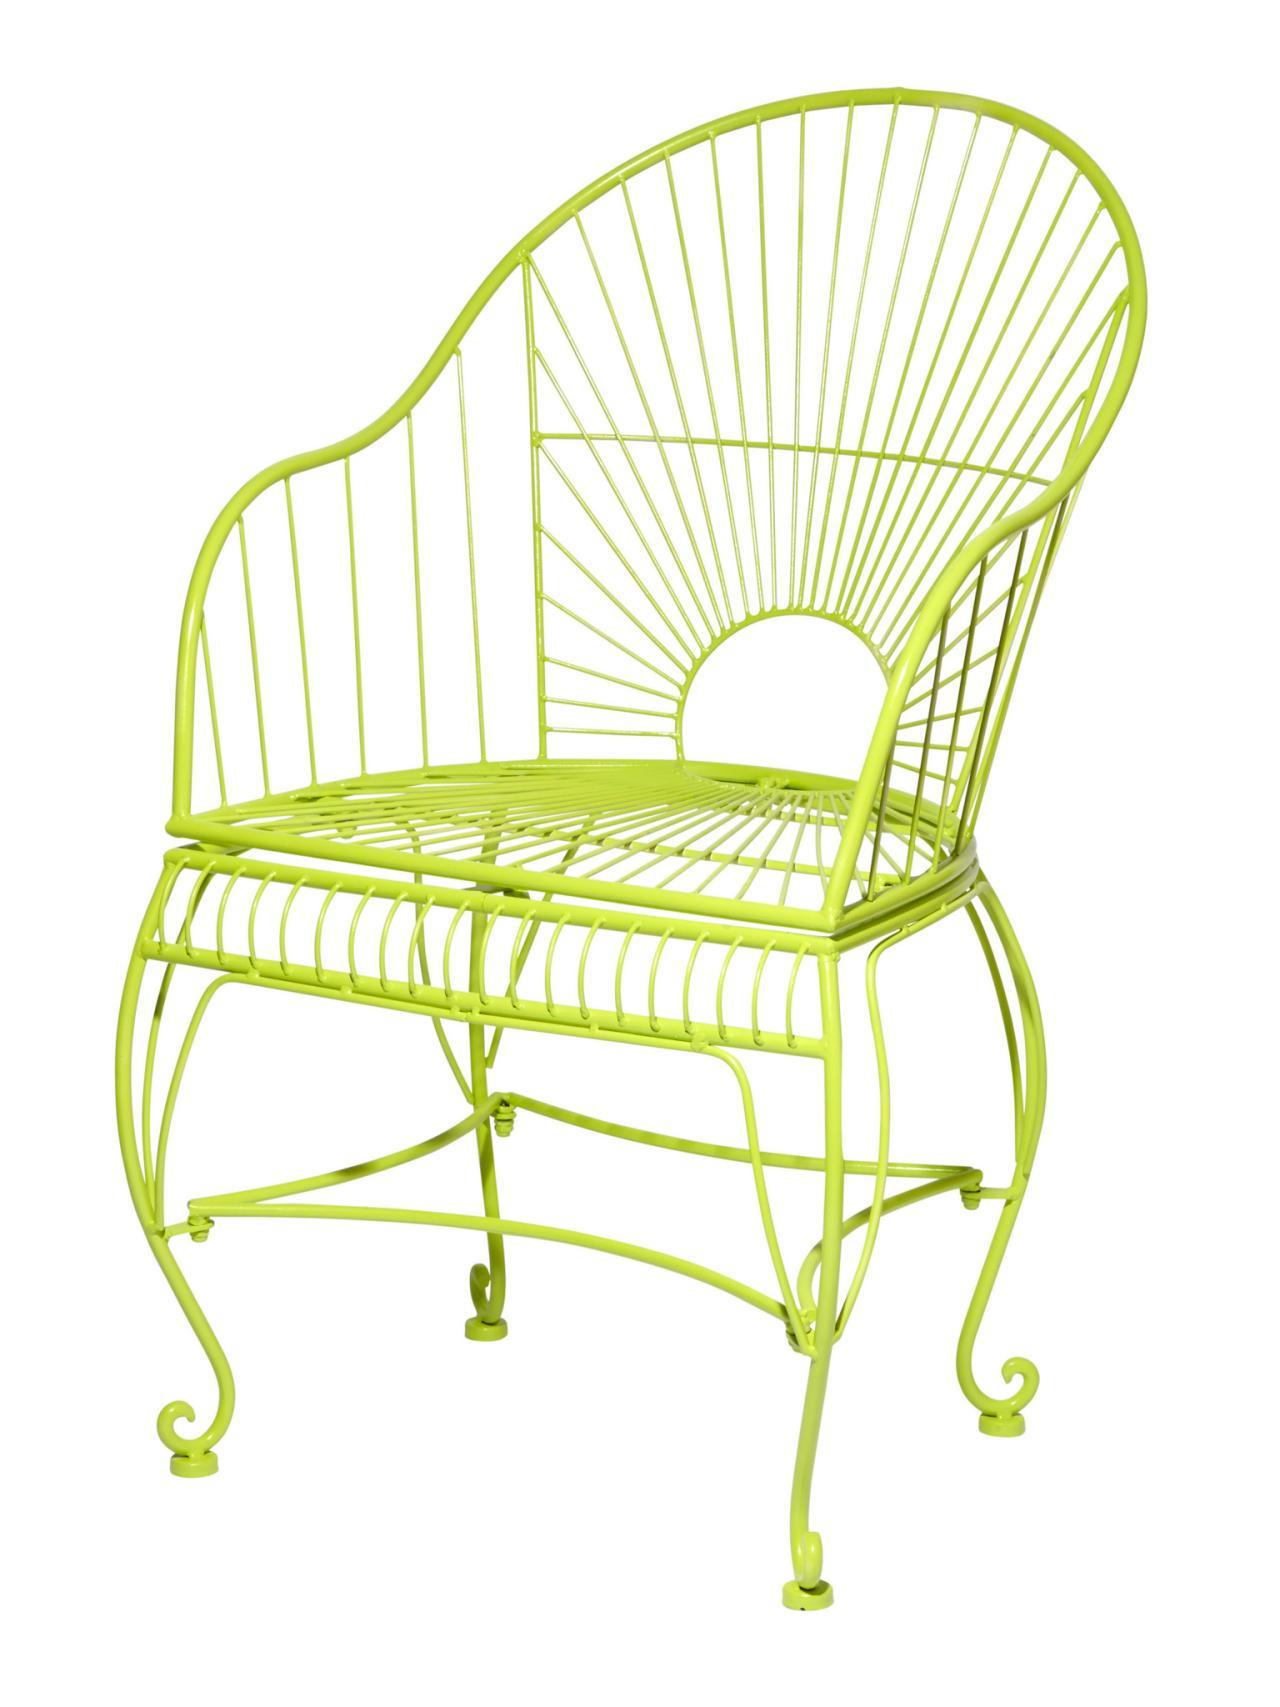 How To Paint Wrought Iron Furniture, Can I Paint Cast Iron Garden Furniture